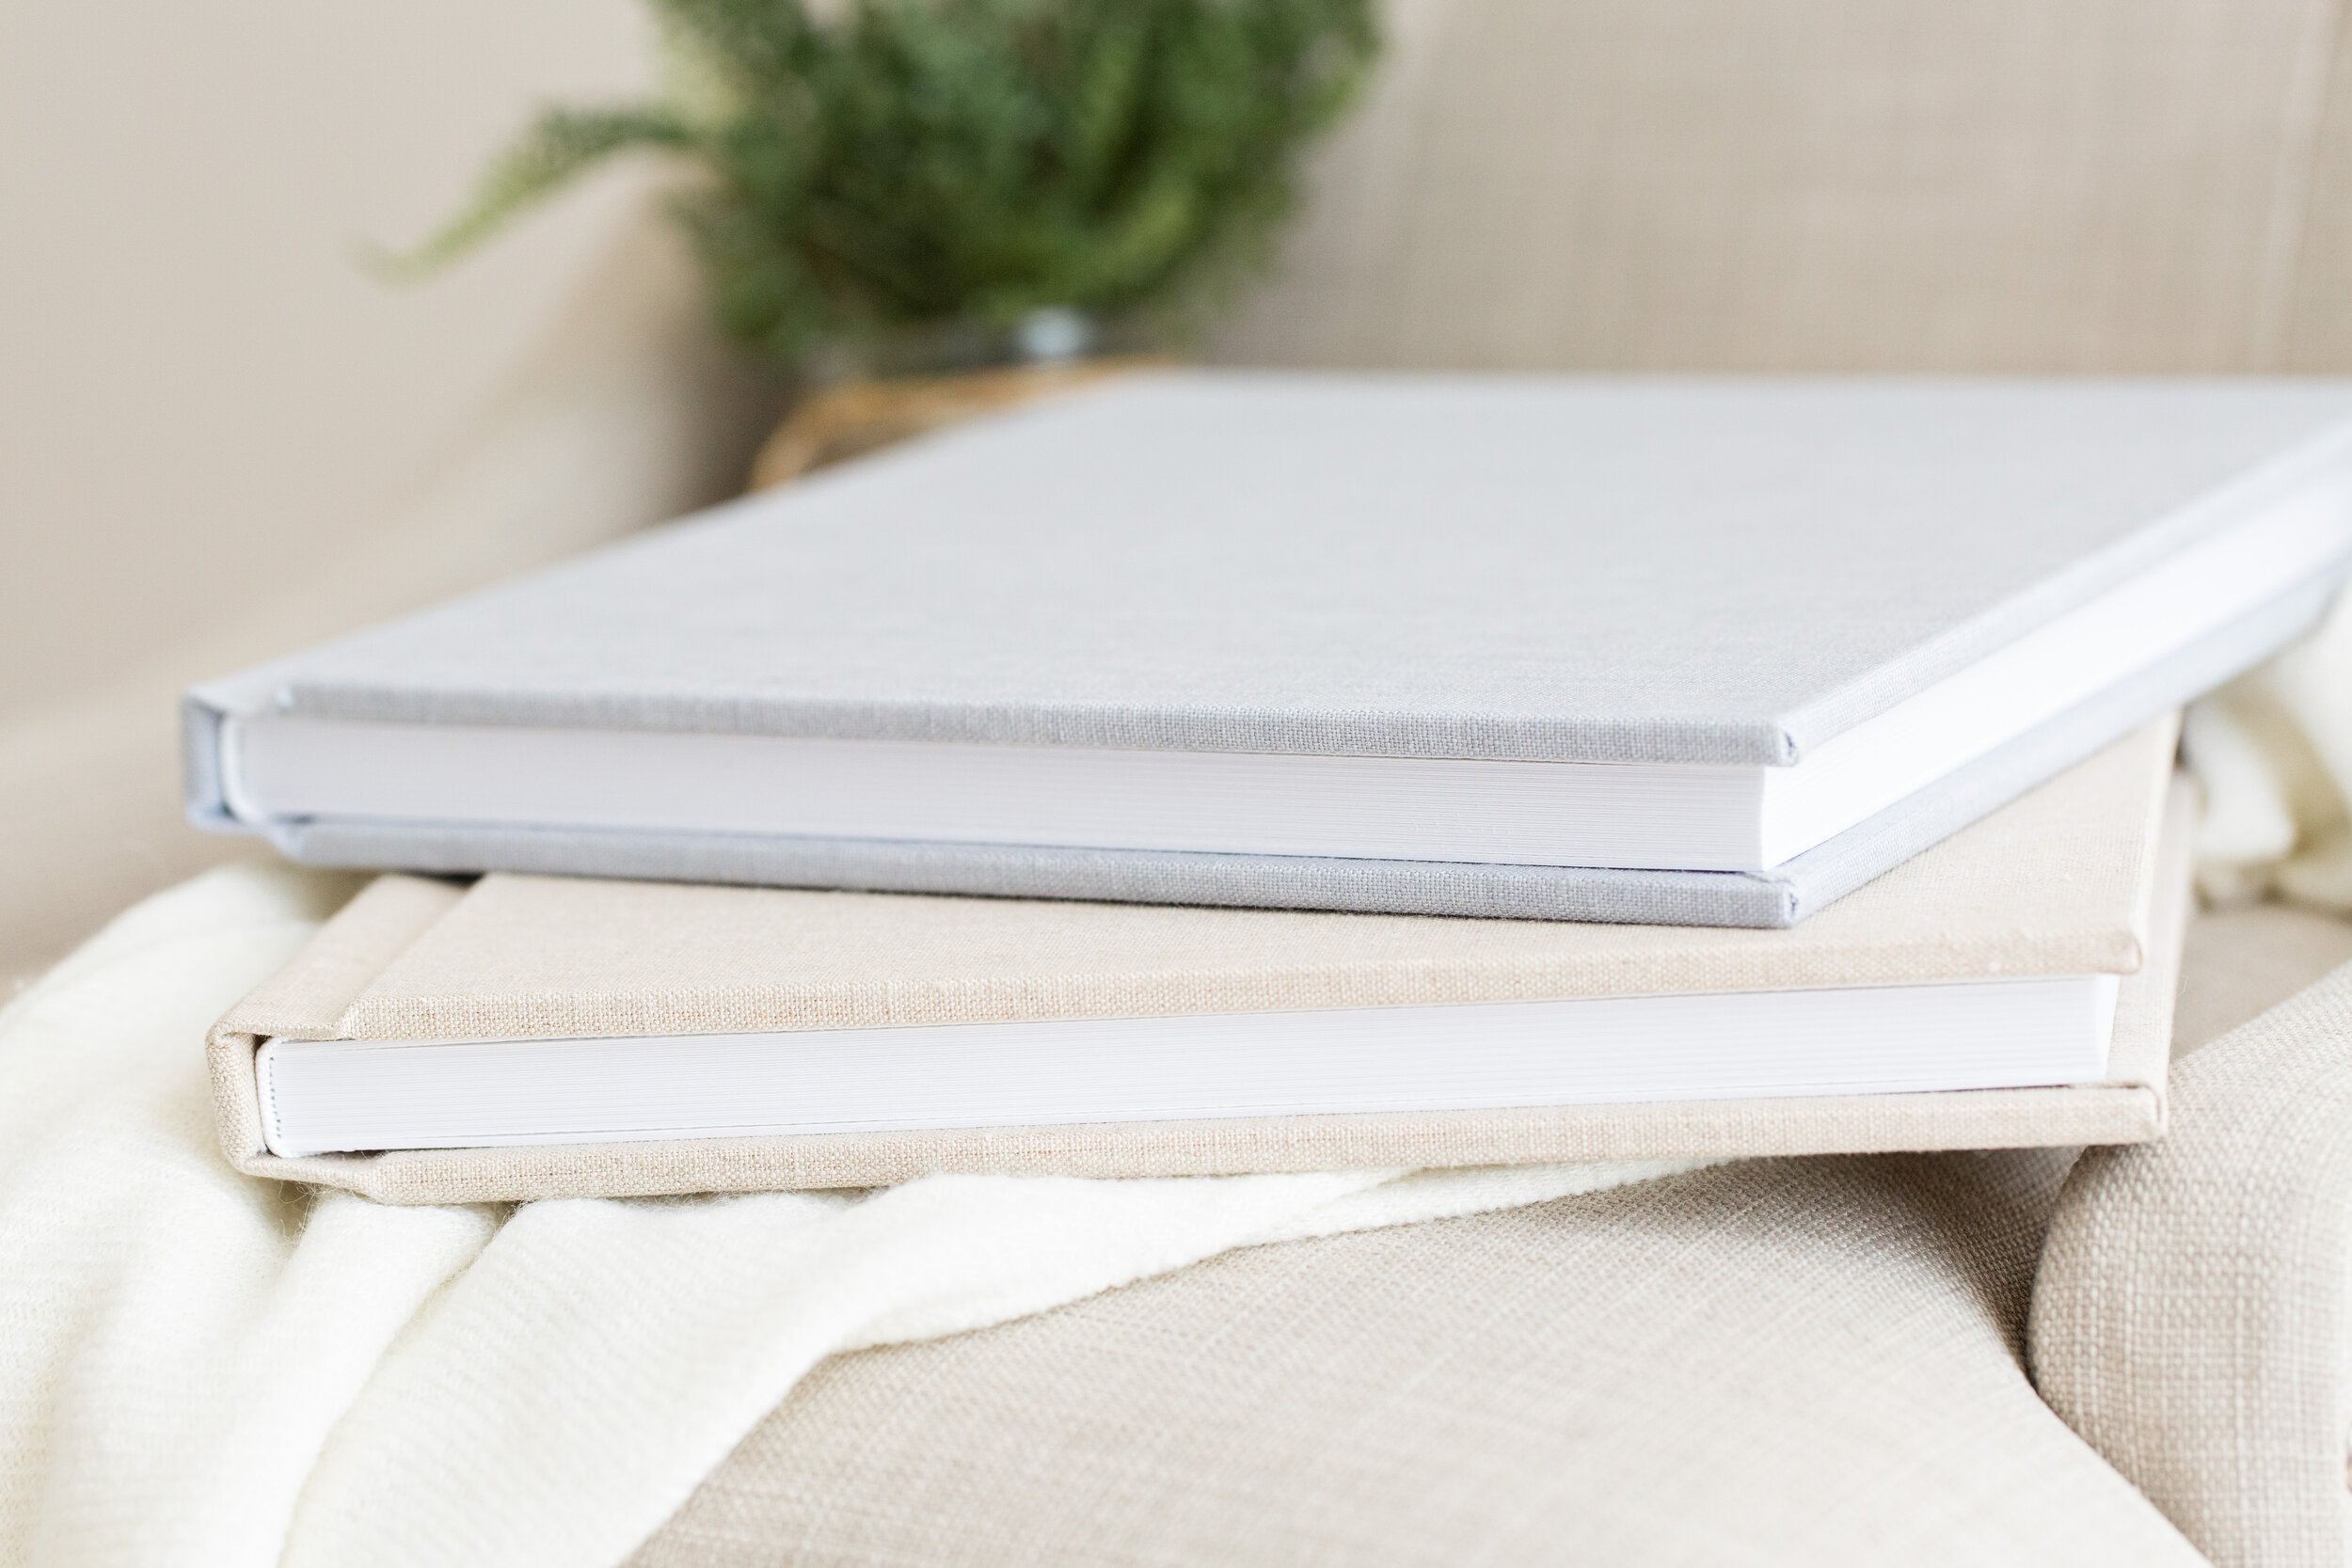 Linen albums are by far the favorite of Louisville KY and Southern IN families. They are chosen again and again. They are hand-bound with soft toned coverings to match your home now and 20 years from now. They include favorites from your newborn, ma…